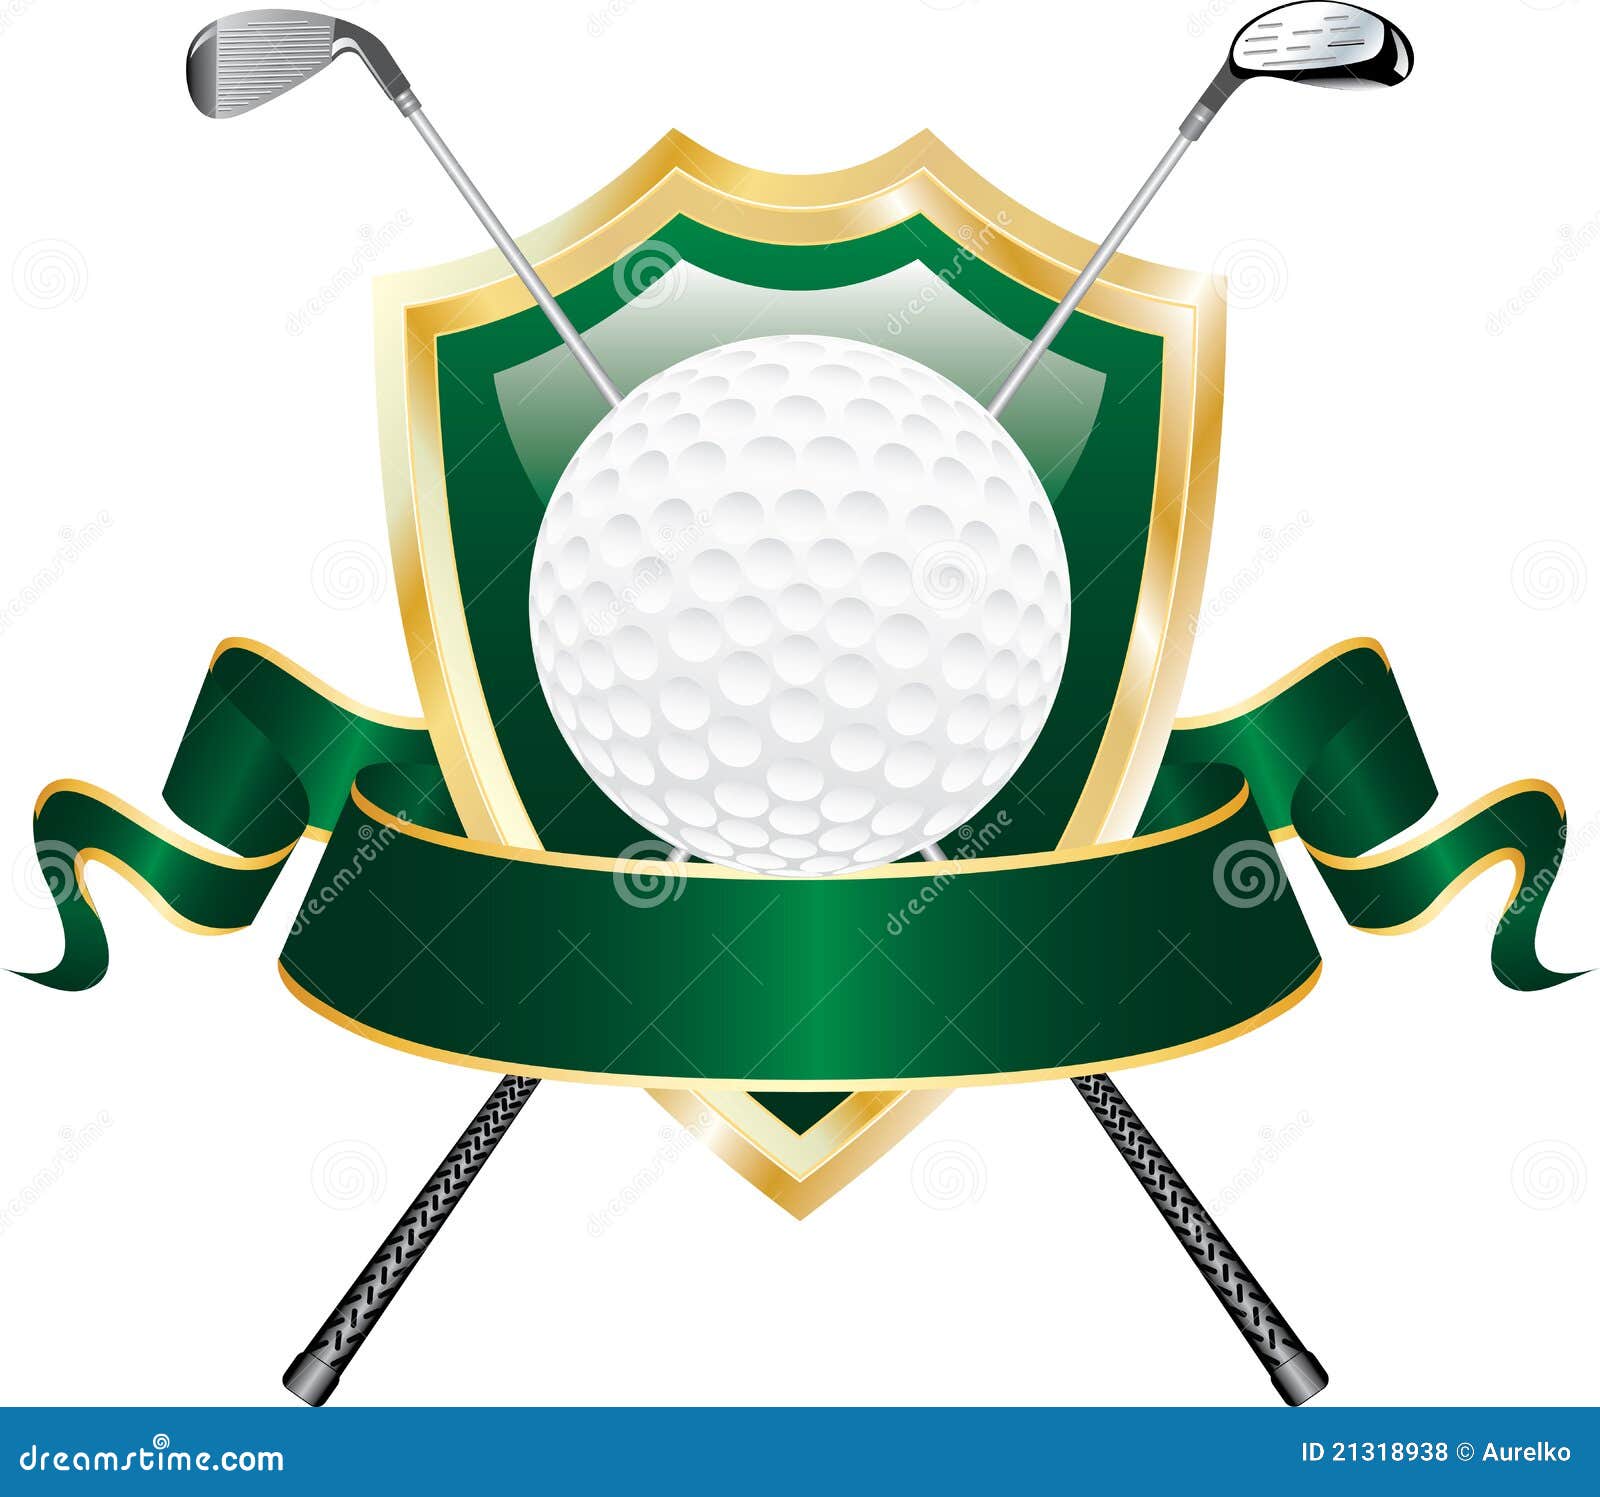 free animated golf clipart - photo #47